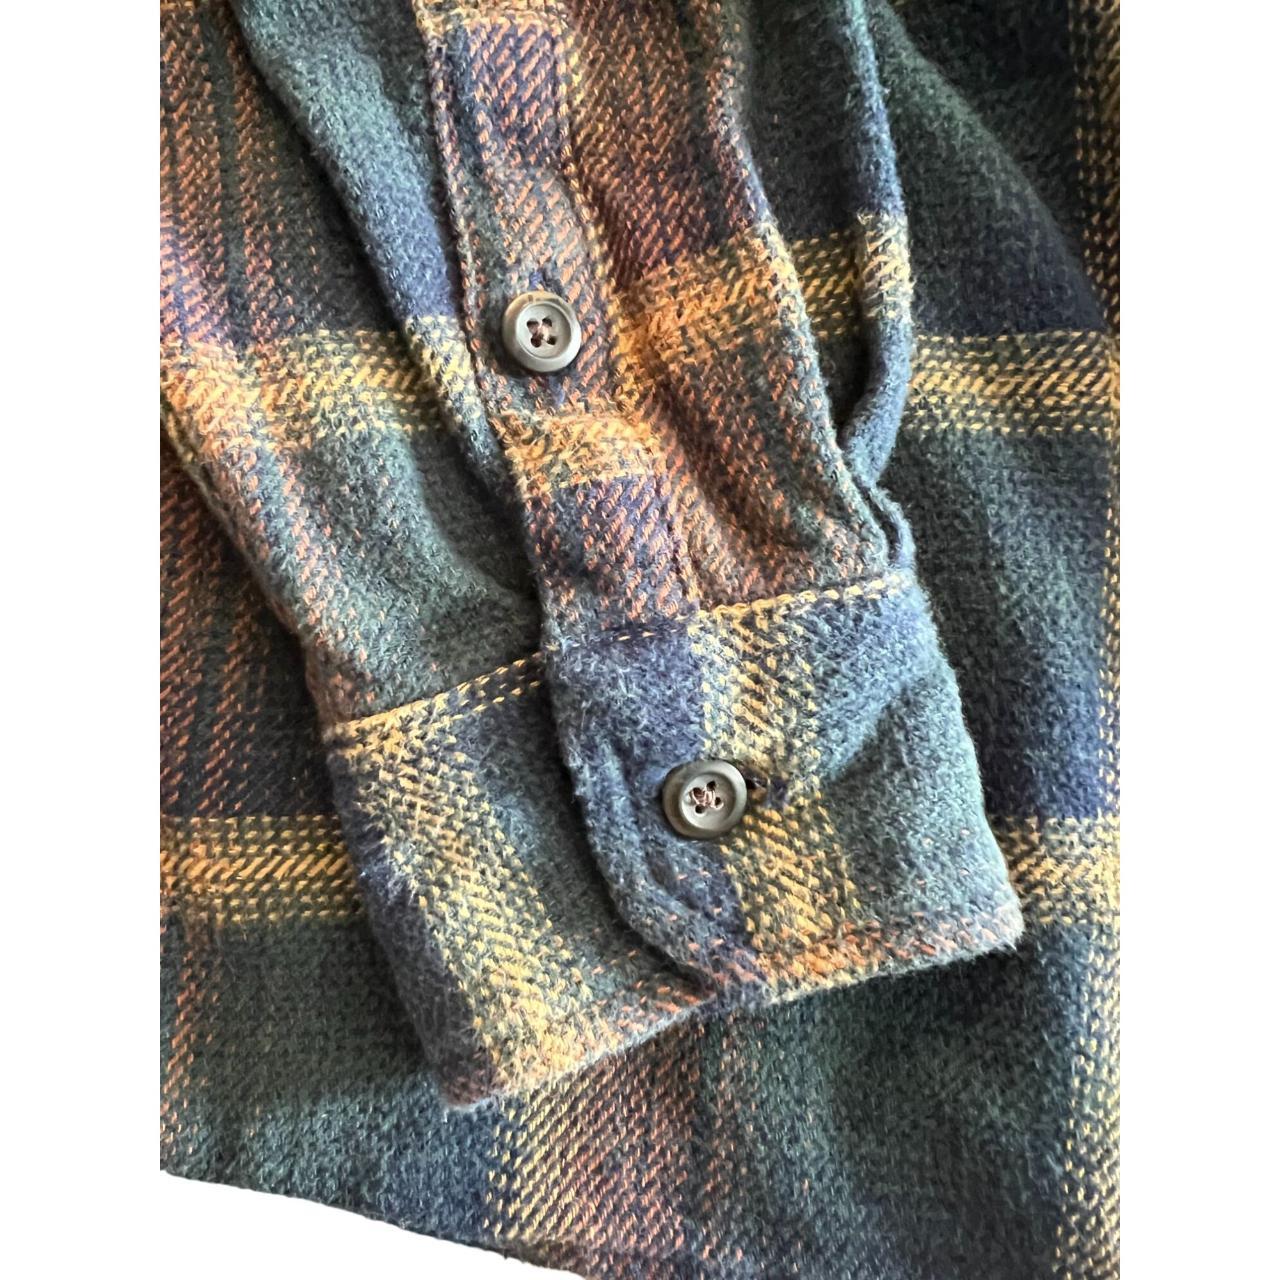 Orvis Big Bear Heavyweight Double Brushed Flannel Button Down Shirt with Hand Warmer Pockets